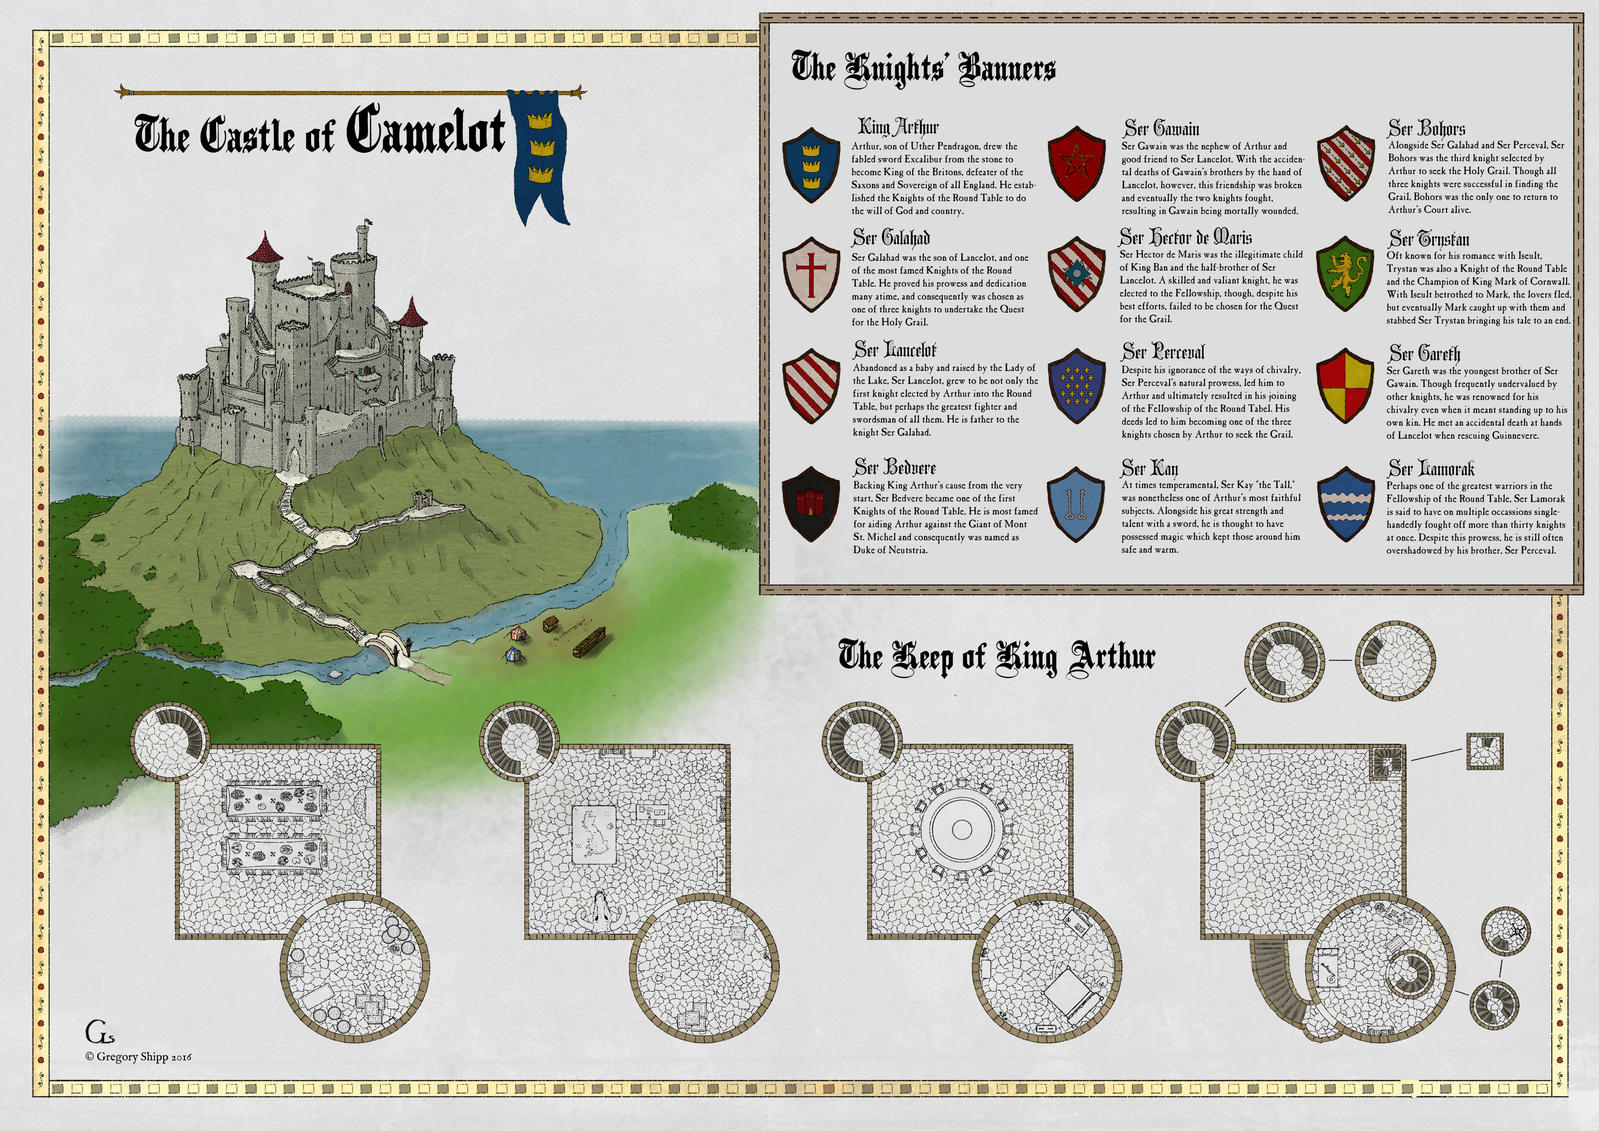 The Knights of Camelot